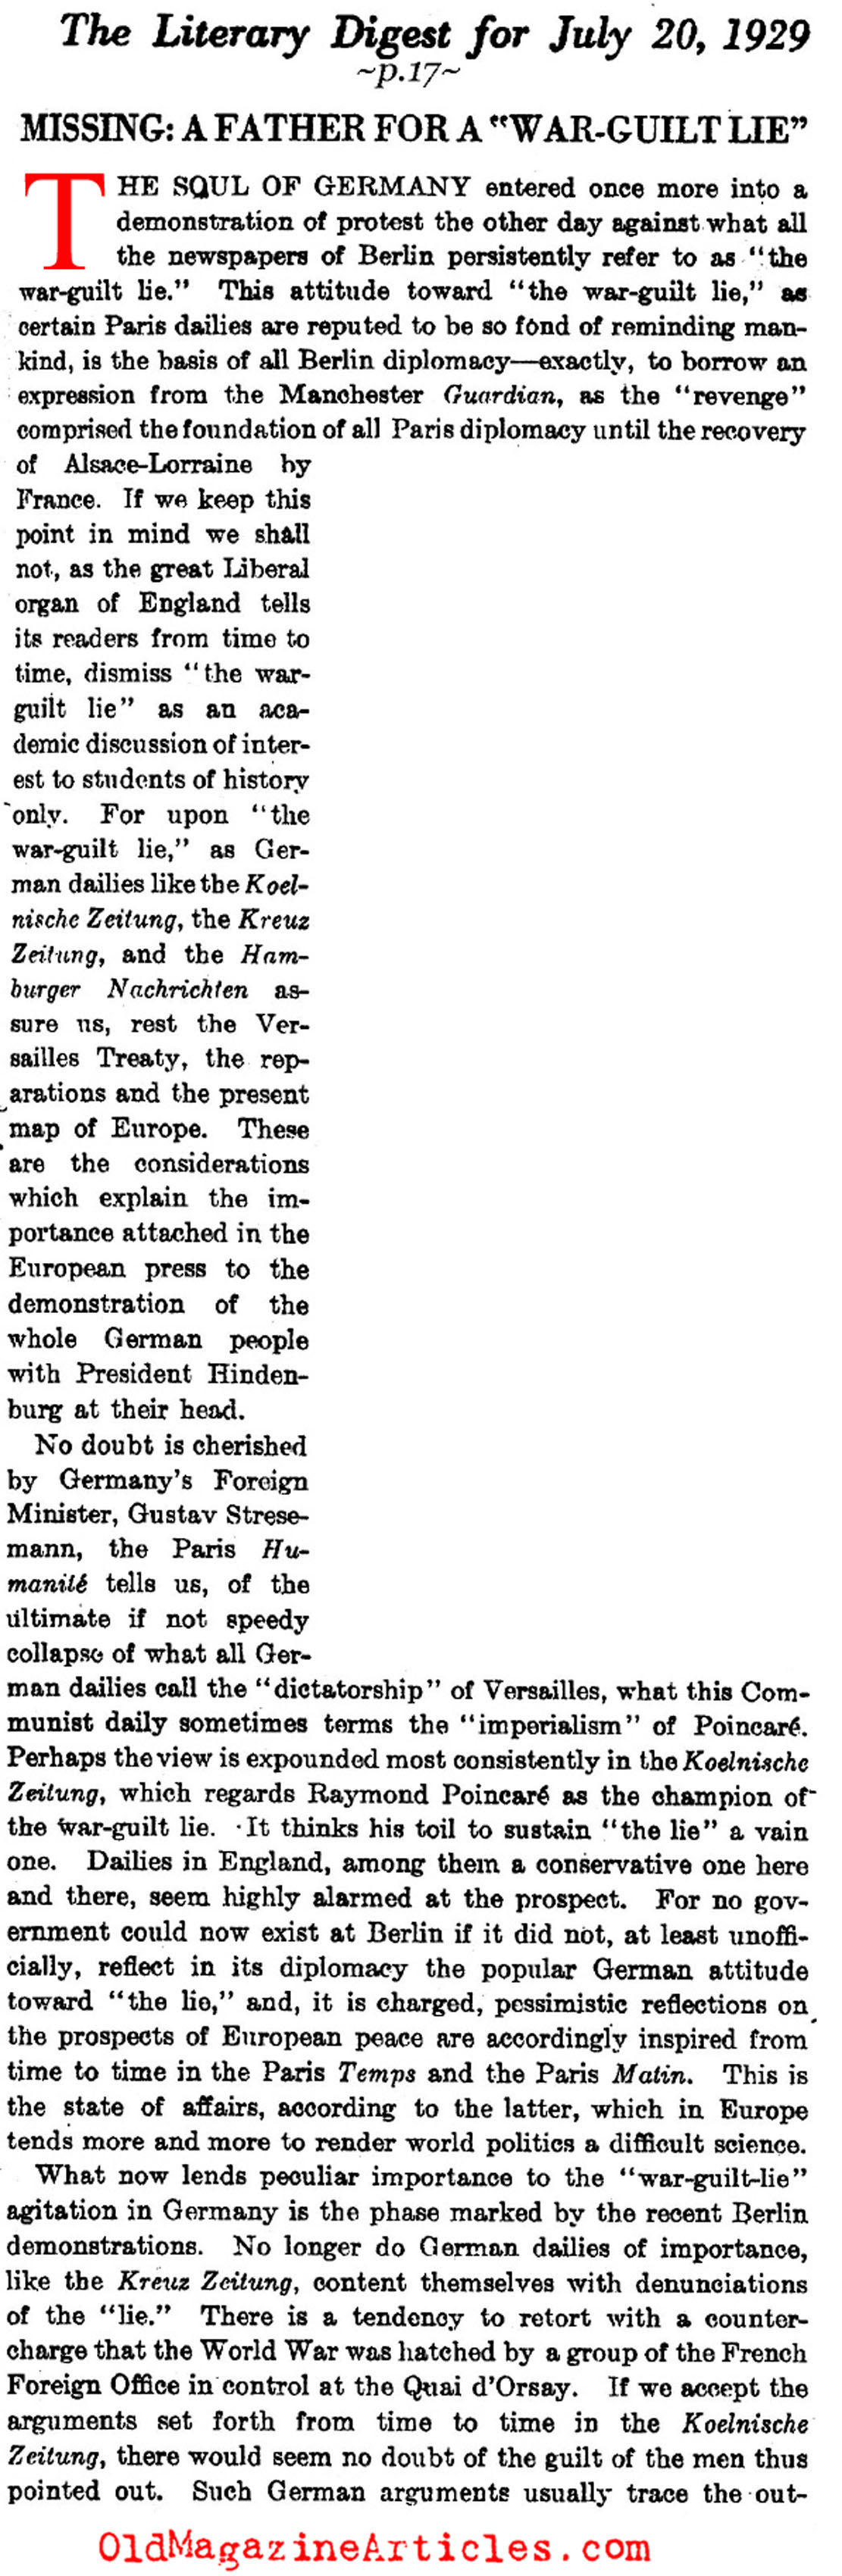 Germany's Discomfort Over the War-Guilt Clause (Literary Digest, 1929)